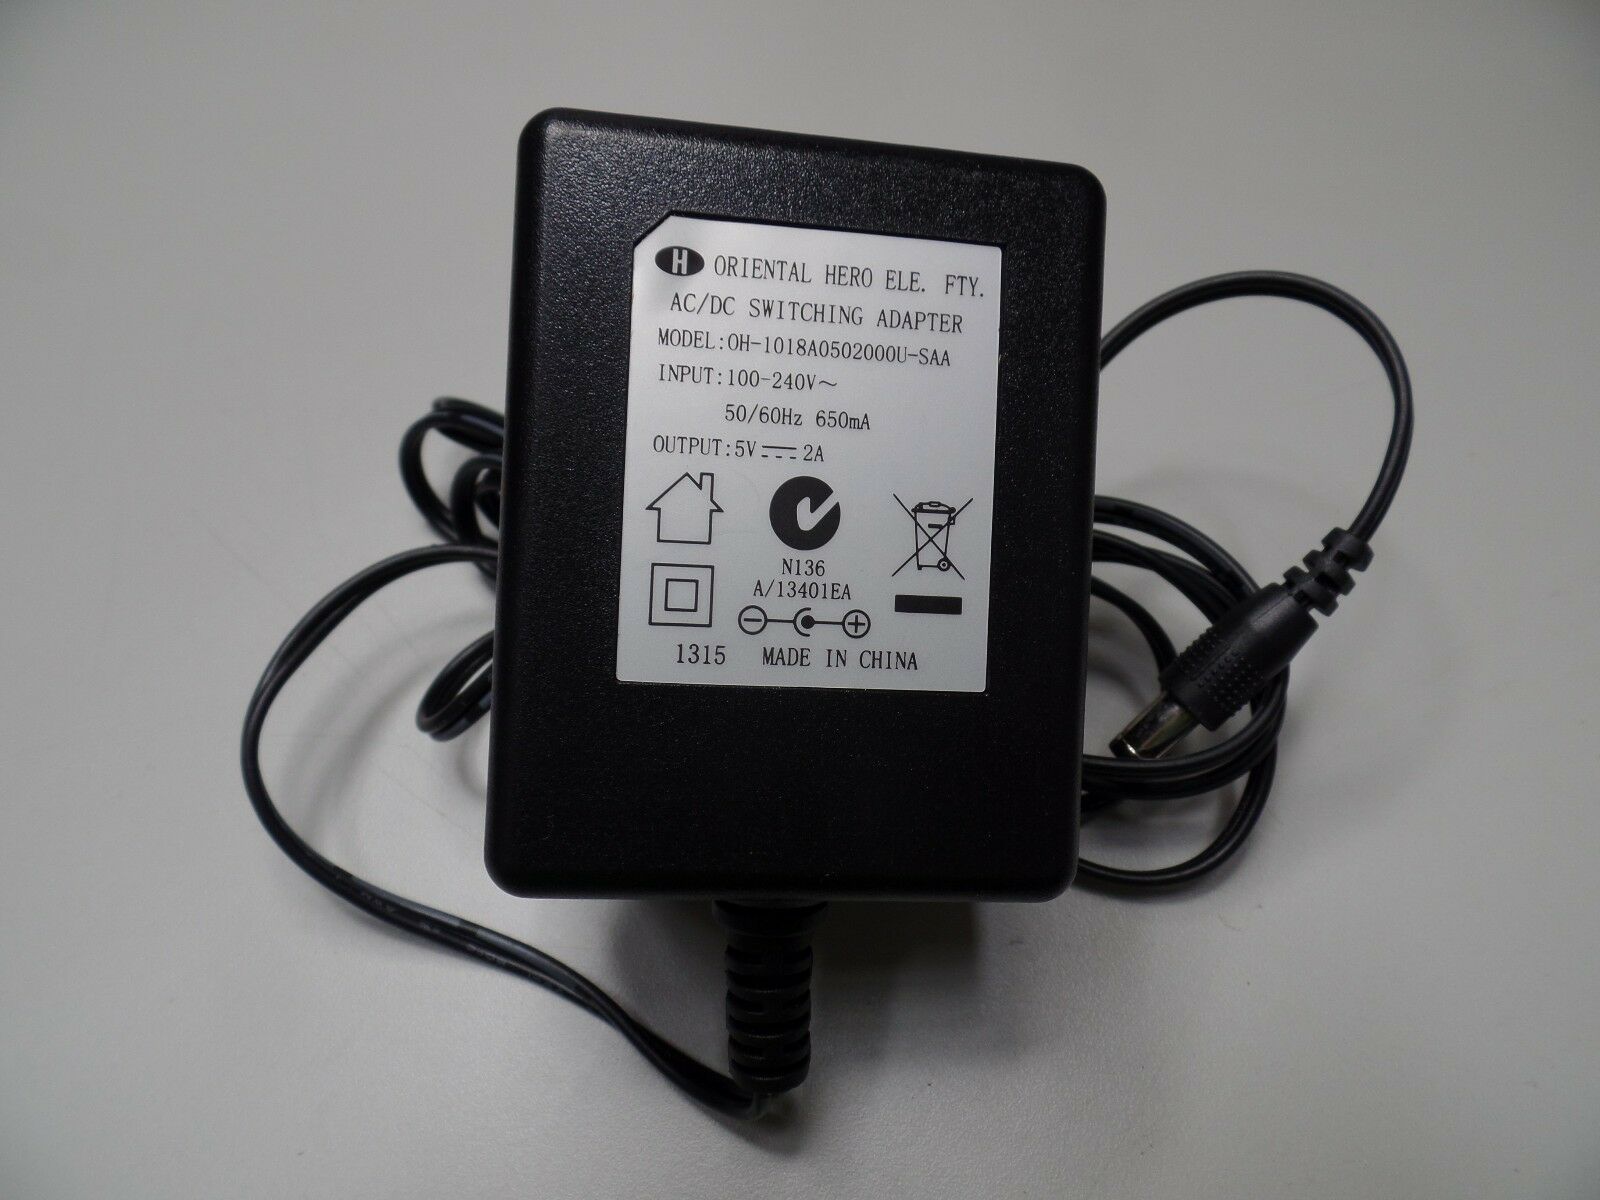 Oriental Hero AC/DC Switching Power Adapter OH-1018A0502000U-SAA 5V 2A Specifica - Click Image to Close